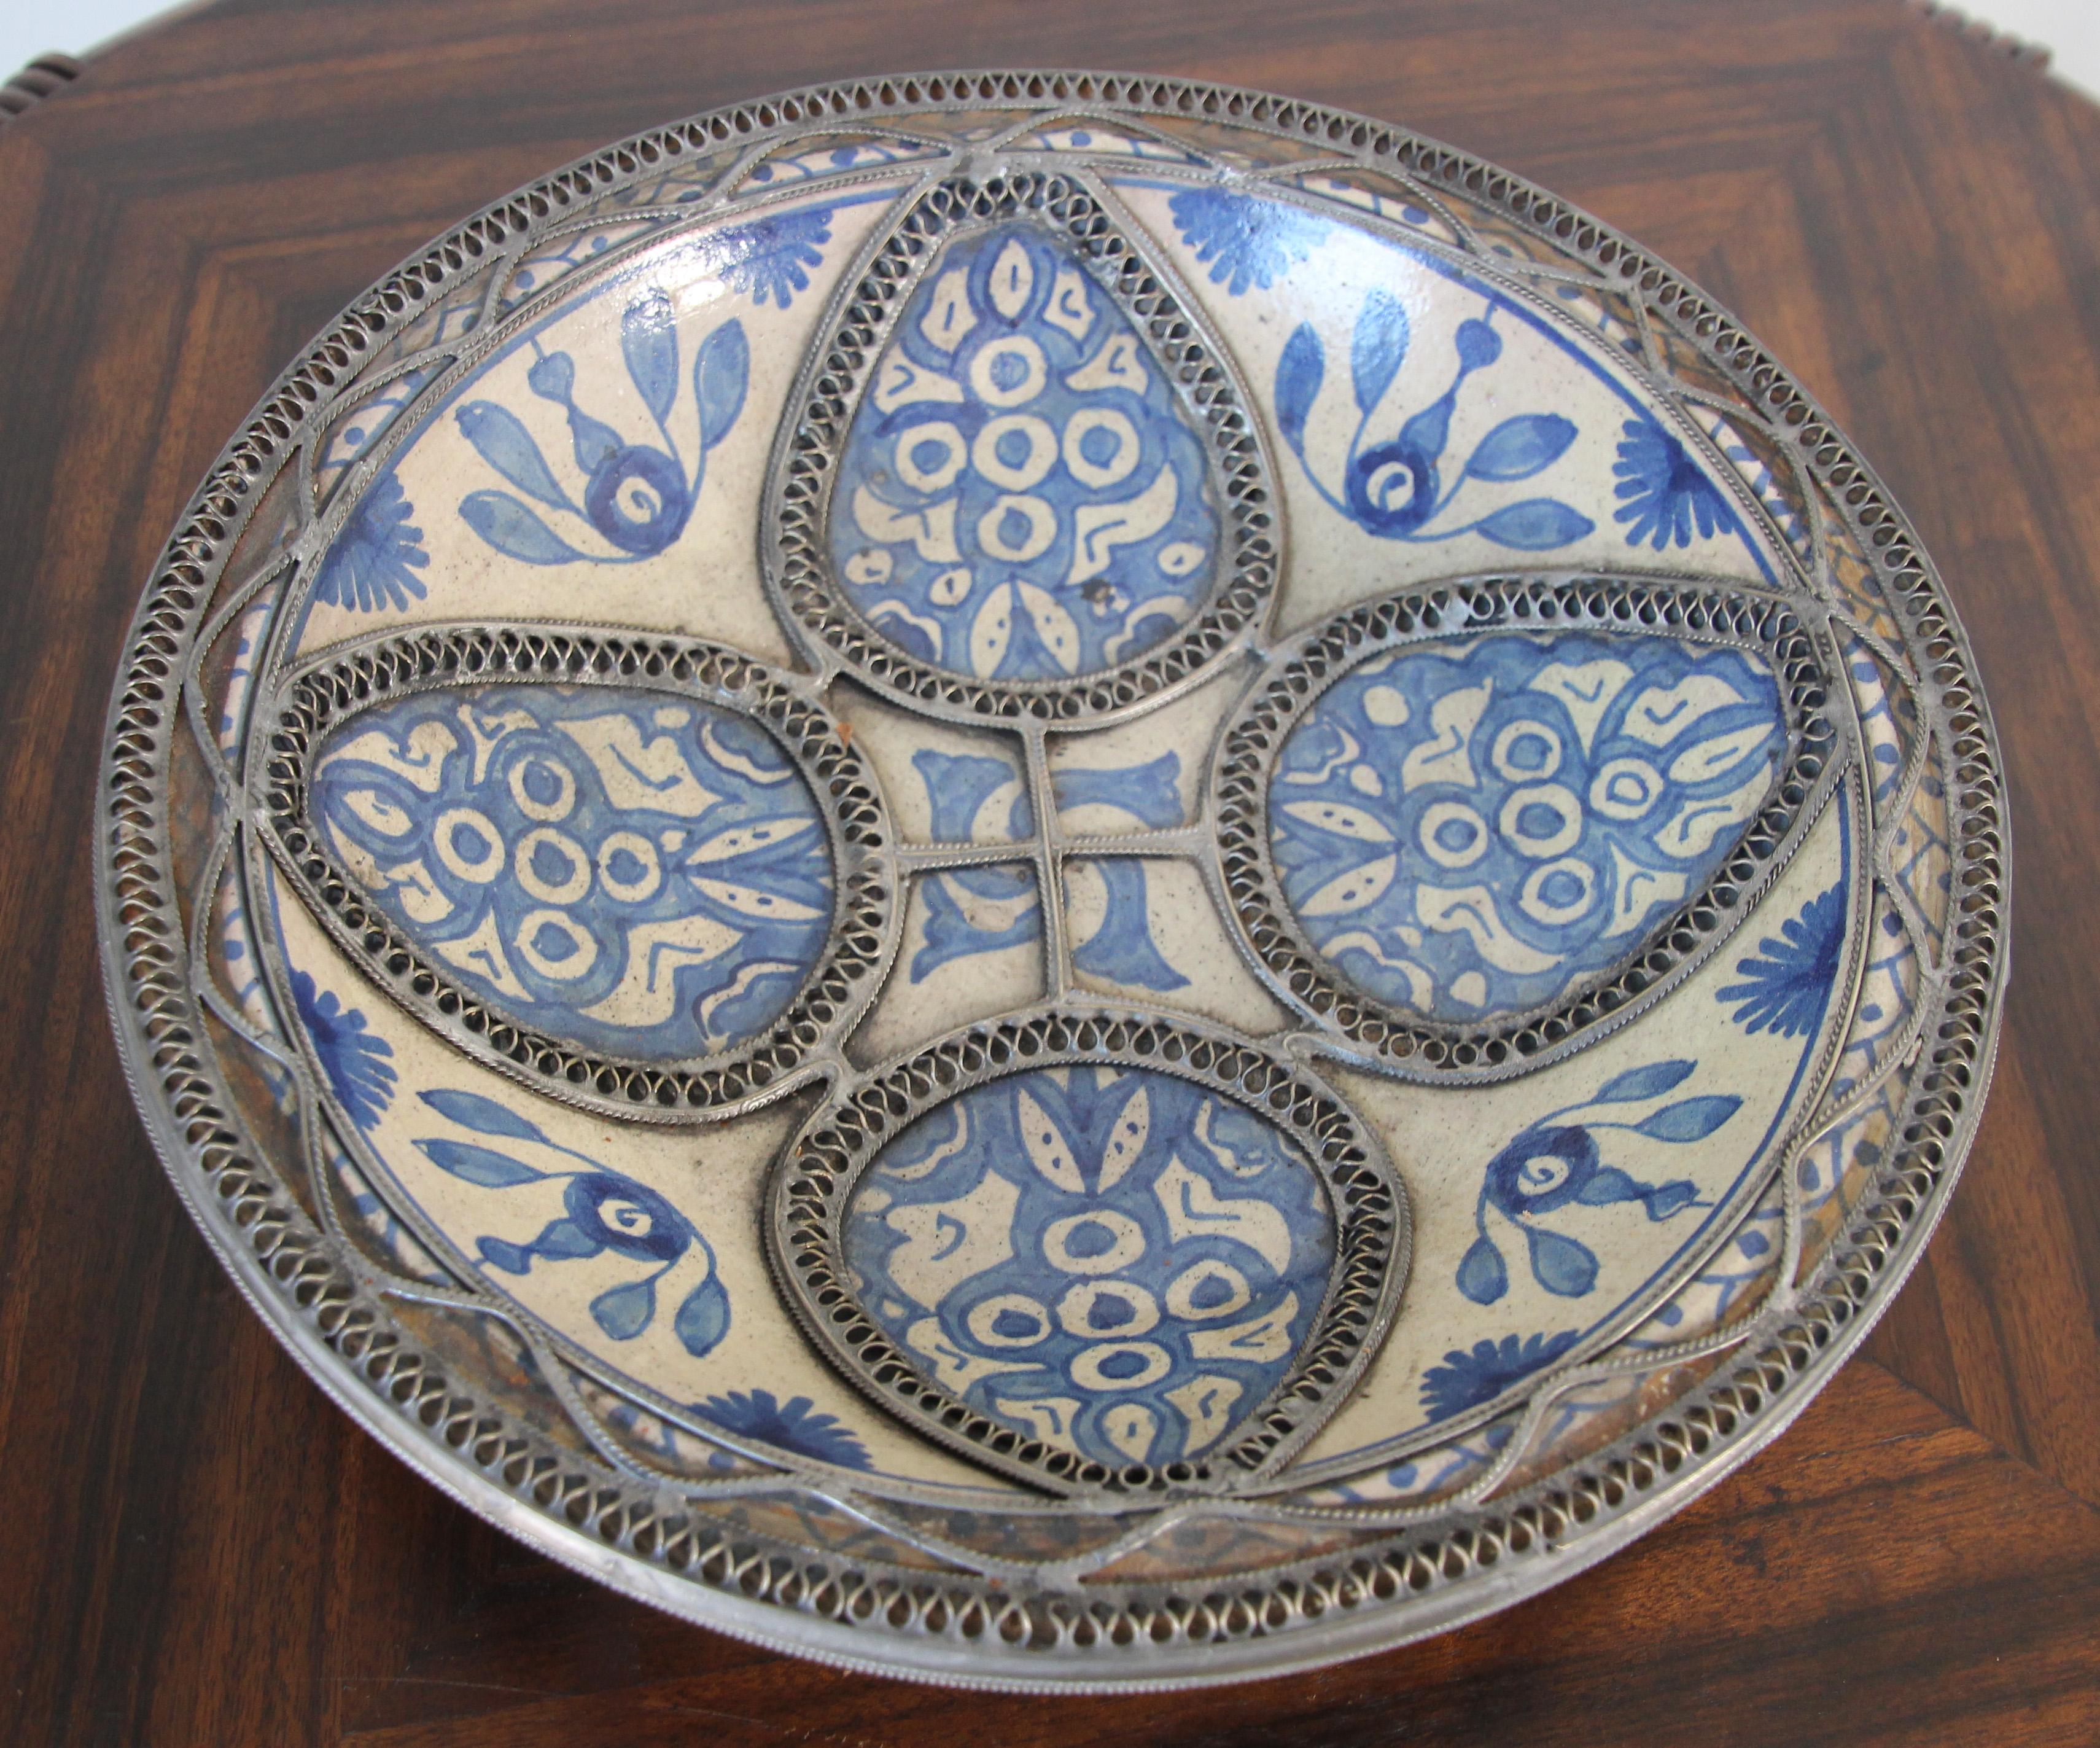 Handcrafted Moorish Moroccan blue decorative ceramic Bowl, dish from Fez.
Moroccan ceramic bowl in Bleu de Fez, very nice designs hand painted by artist in Fez.
Geometrical and floral Moorish designs and adorned with nickel silver filigree